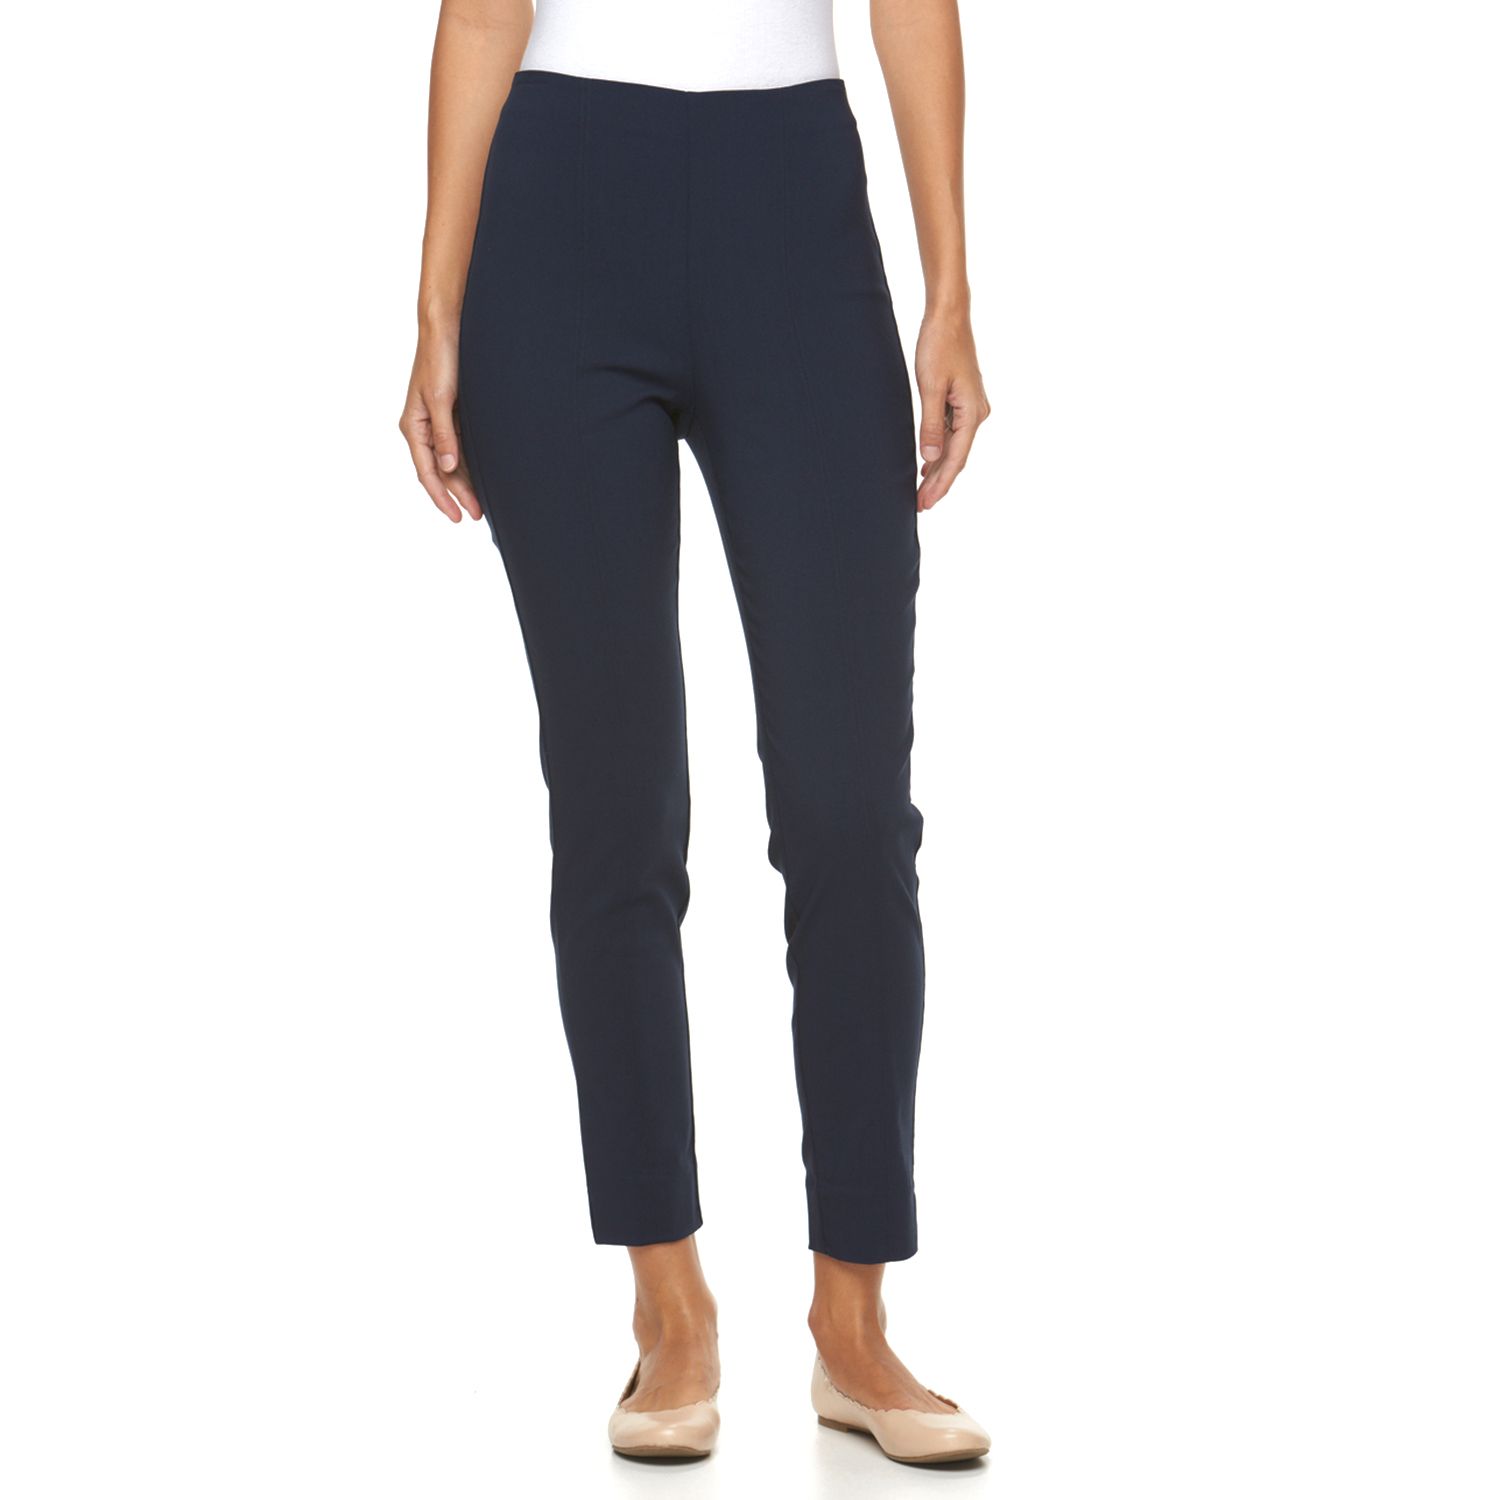 womens tapered ankle pants